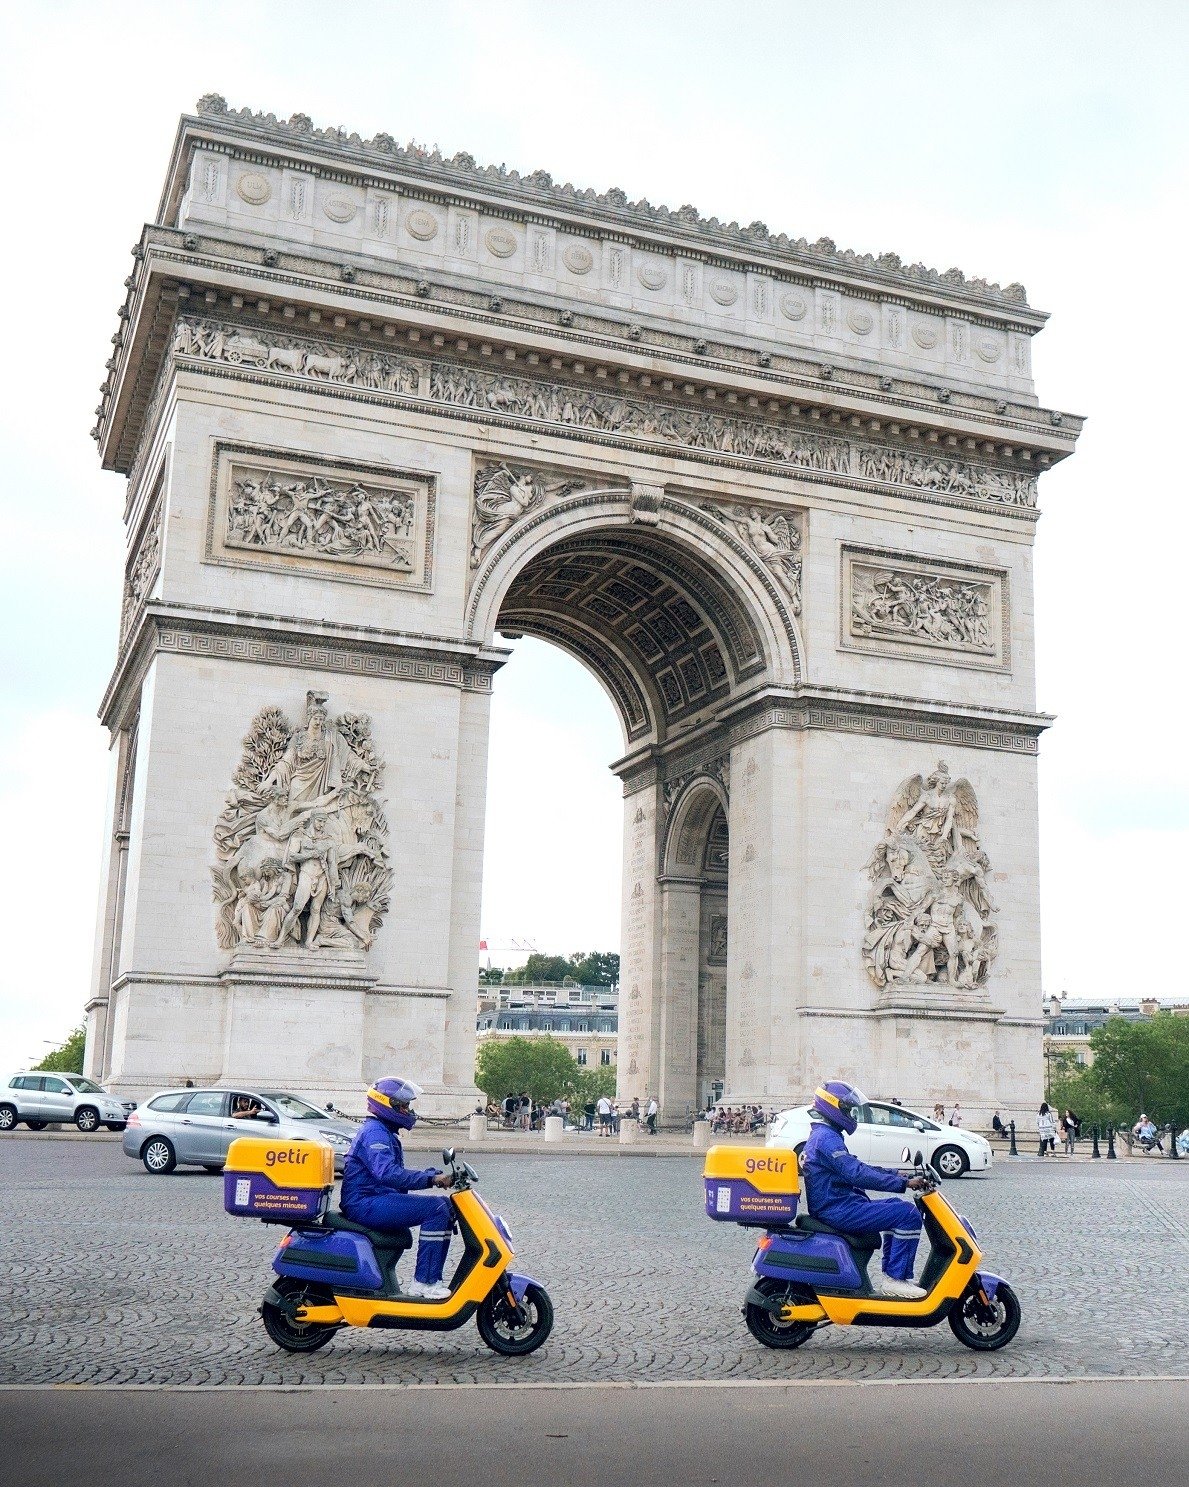 Getir couriers pass by the Arc de Triomphe on Champs Elysees avenue in Paris, France, June 22, 2021. (IHA Photo)